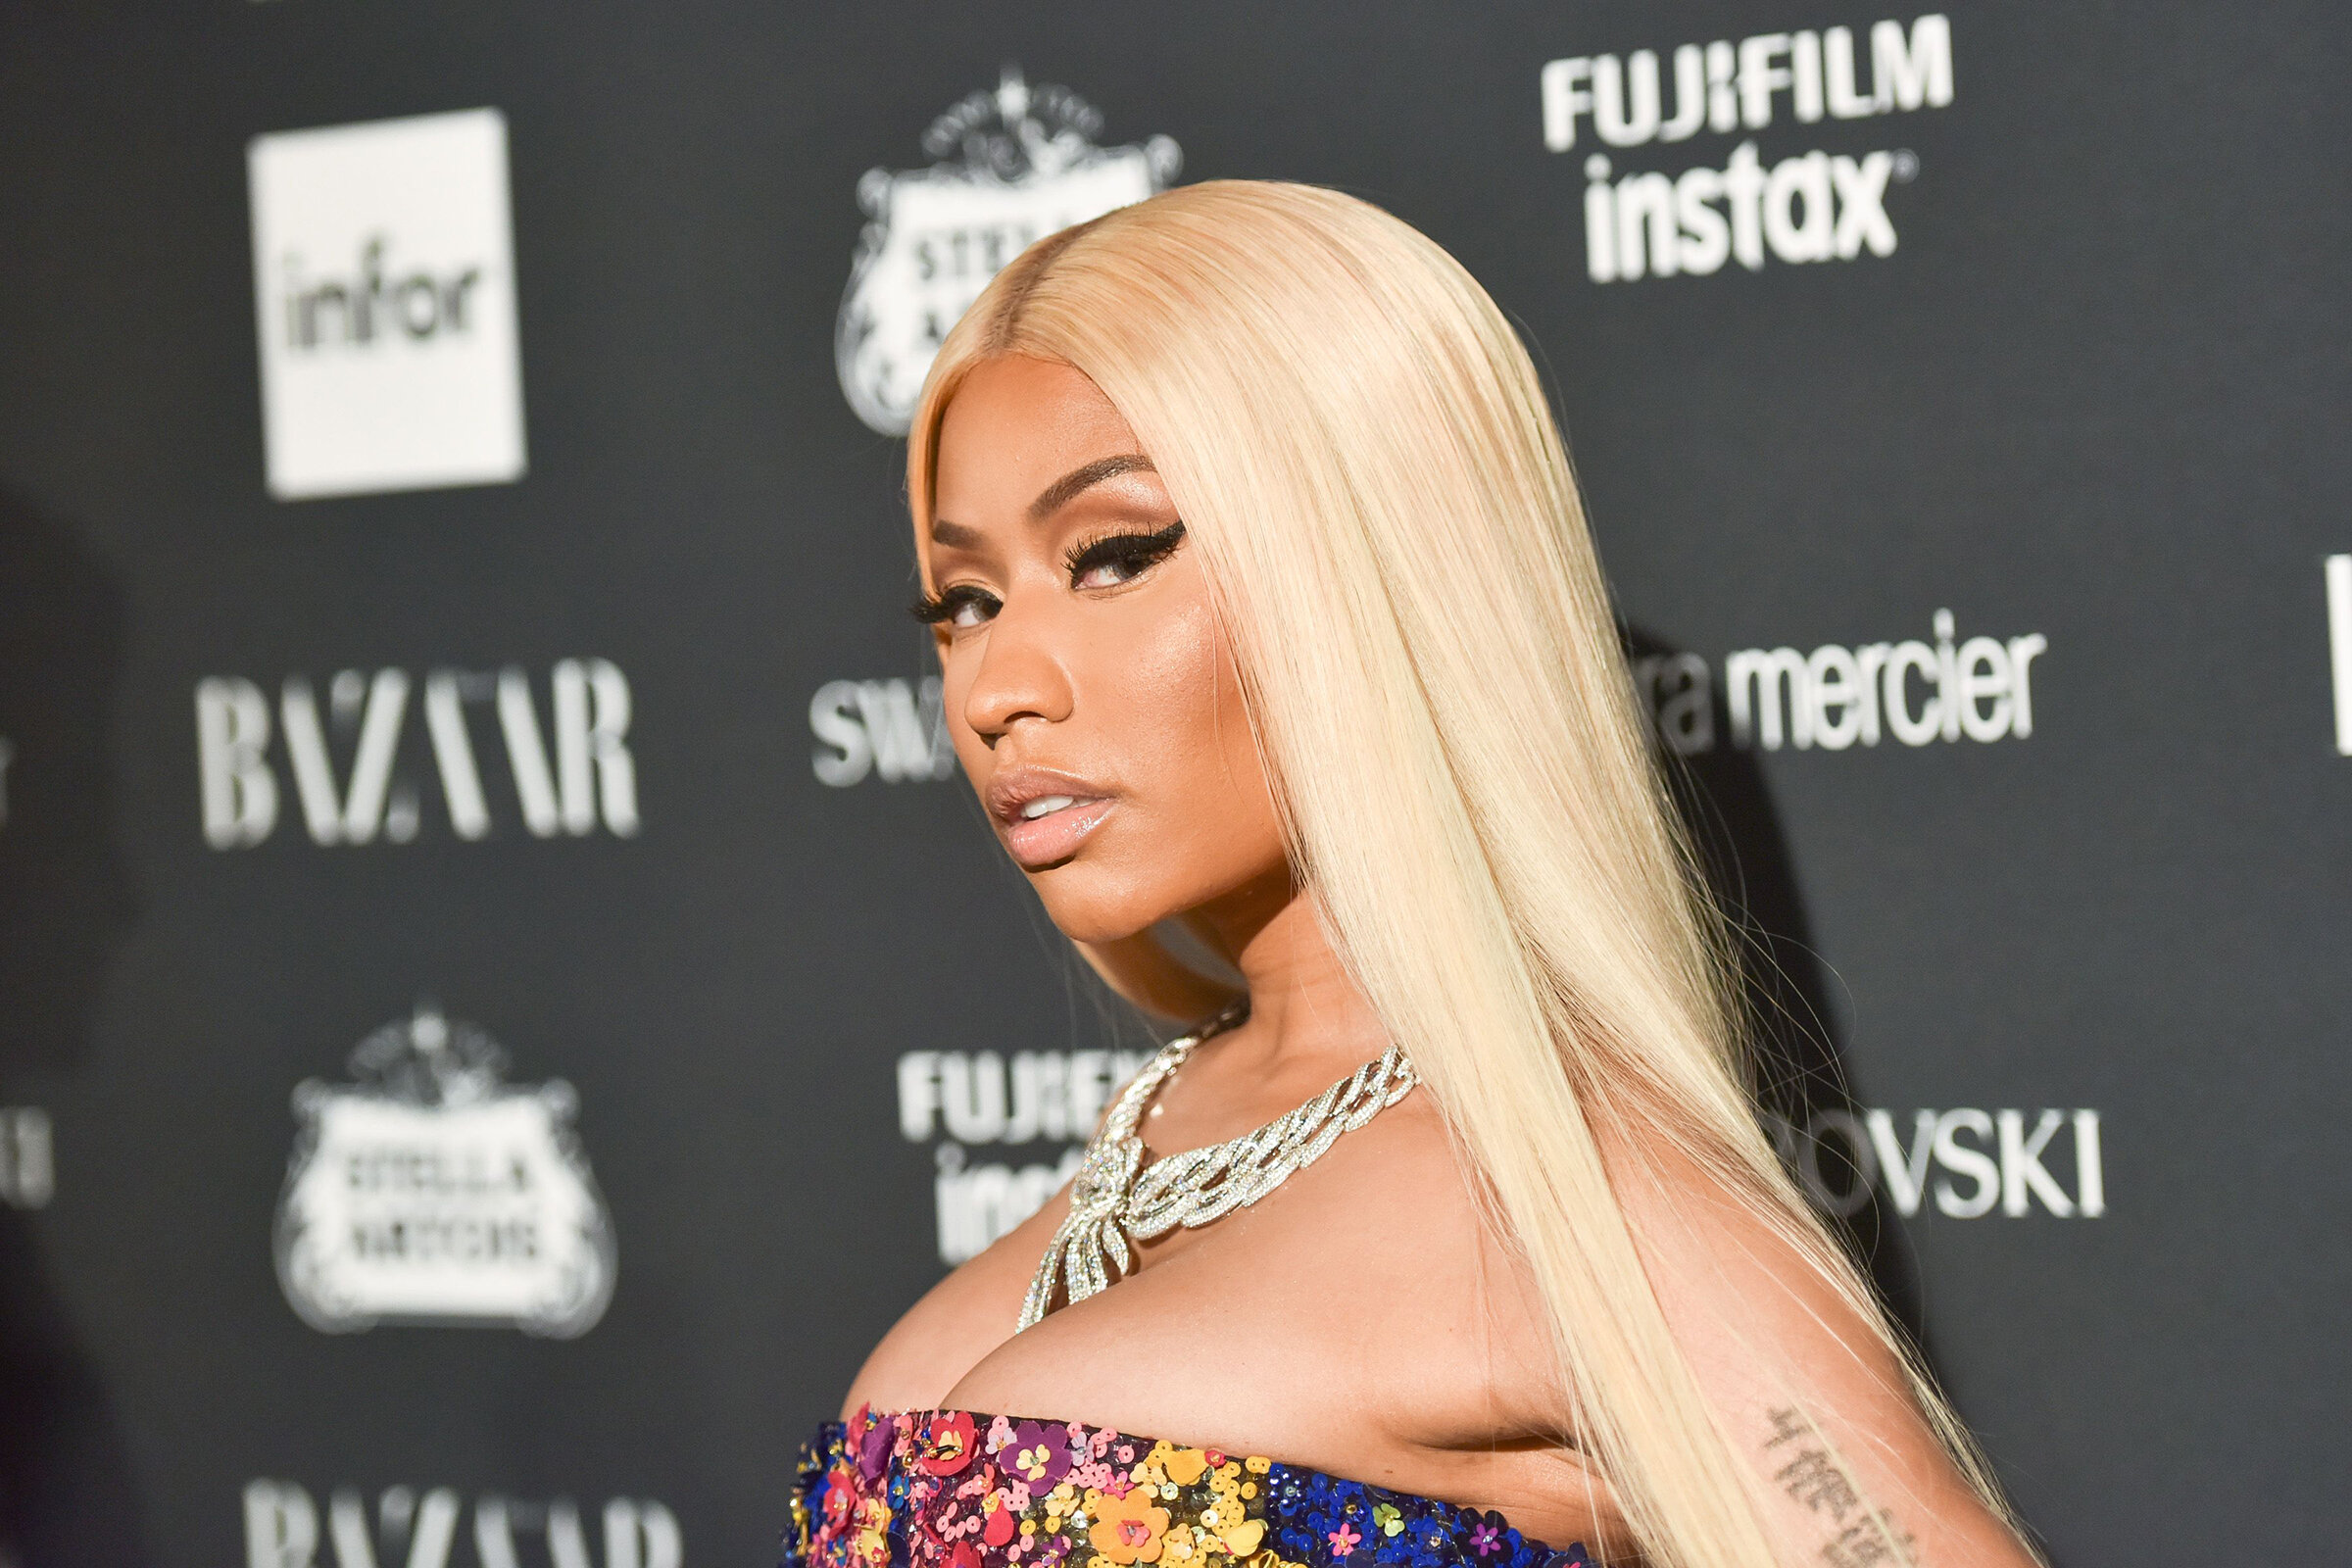 Want to know more about rapper Nicki Minaj? Here's a look at her coming HBO Max docuseries bound to bump her huge net worth.